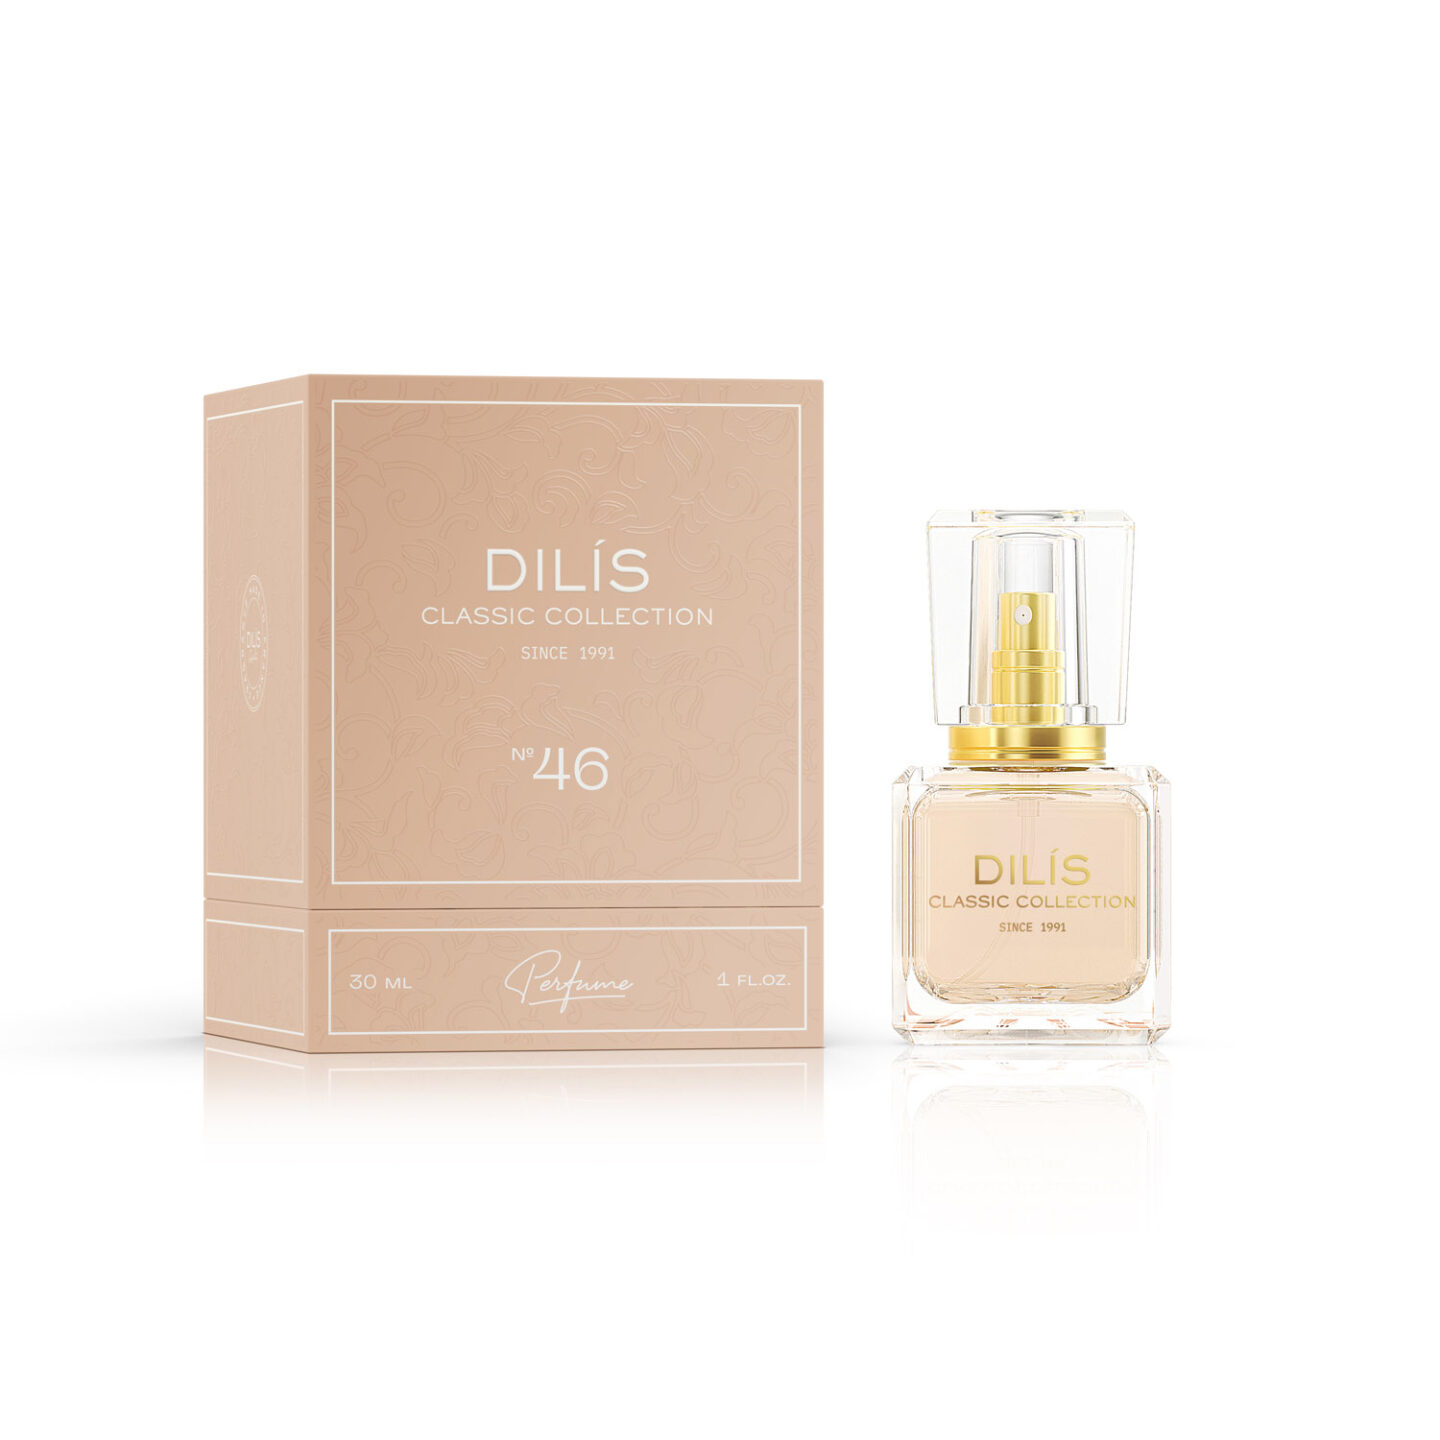 Духи женская Dilis Classic Collection №46 parfum 30 мл духи женские dilis niche collection be bad 50 мл